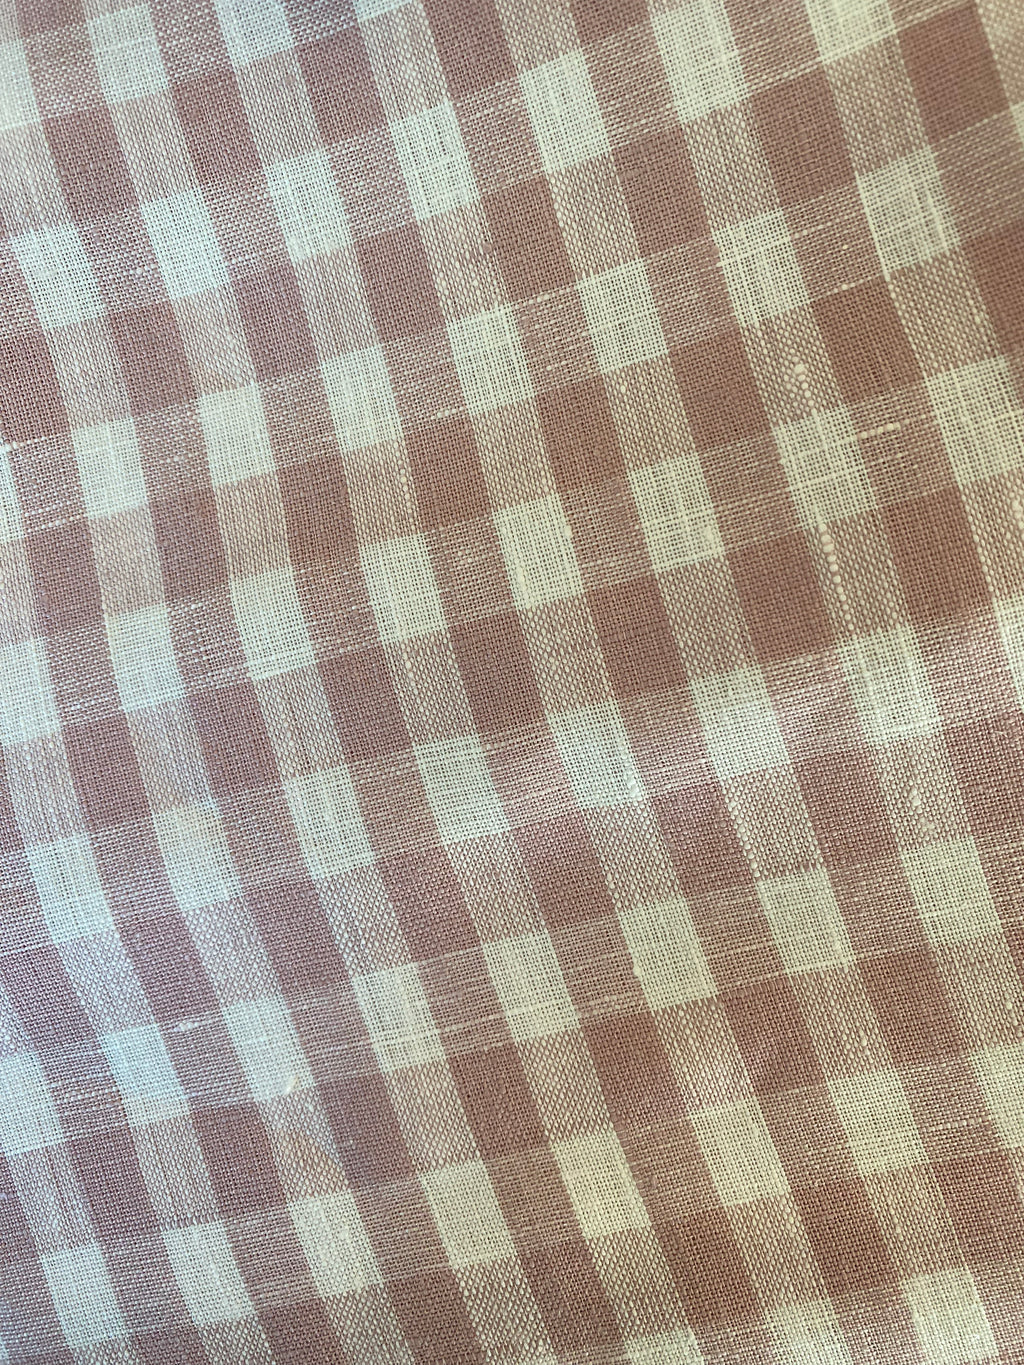 Coastal hamptons tablecloth, linen plaid tablecloth, checked tablecloth, linen tablecloths, 100% linen tablecloths, pink tablecloth, pink linen tablecloth, hamptons tablecloth, pink plaid tablecloth, Interior Collections tablecloth, Dining Table Artistry, designer tablecloth, Creative Tablescapes, Elevate Dining Experience, stunning tablecloths, indoor outdoor tablecloths, Easter tablecloth, Christmas tablecloth, pink love